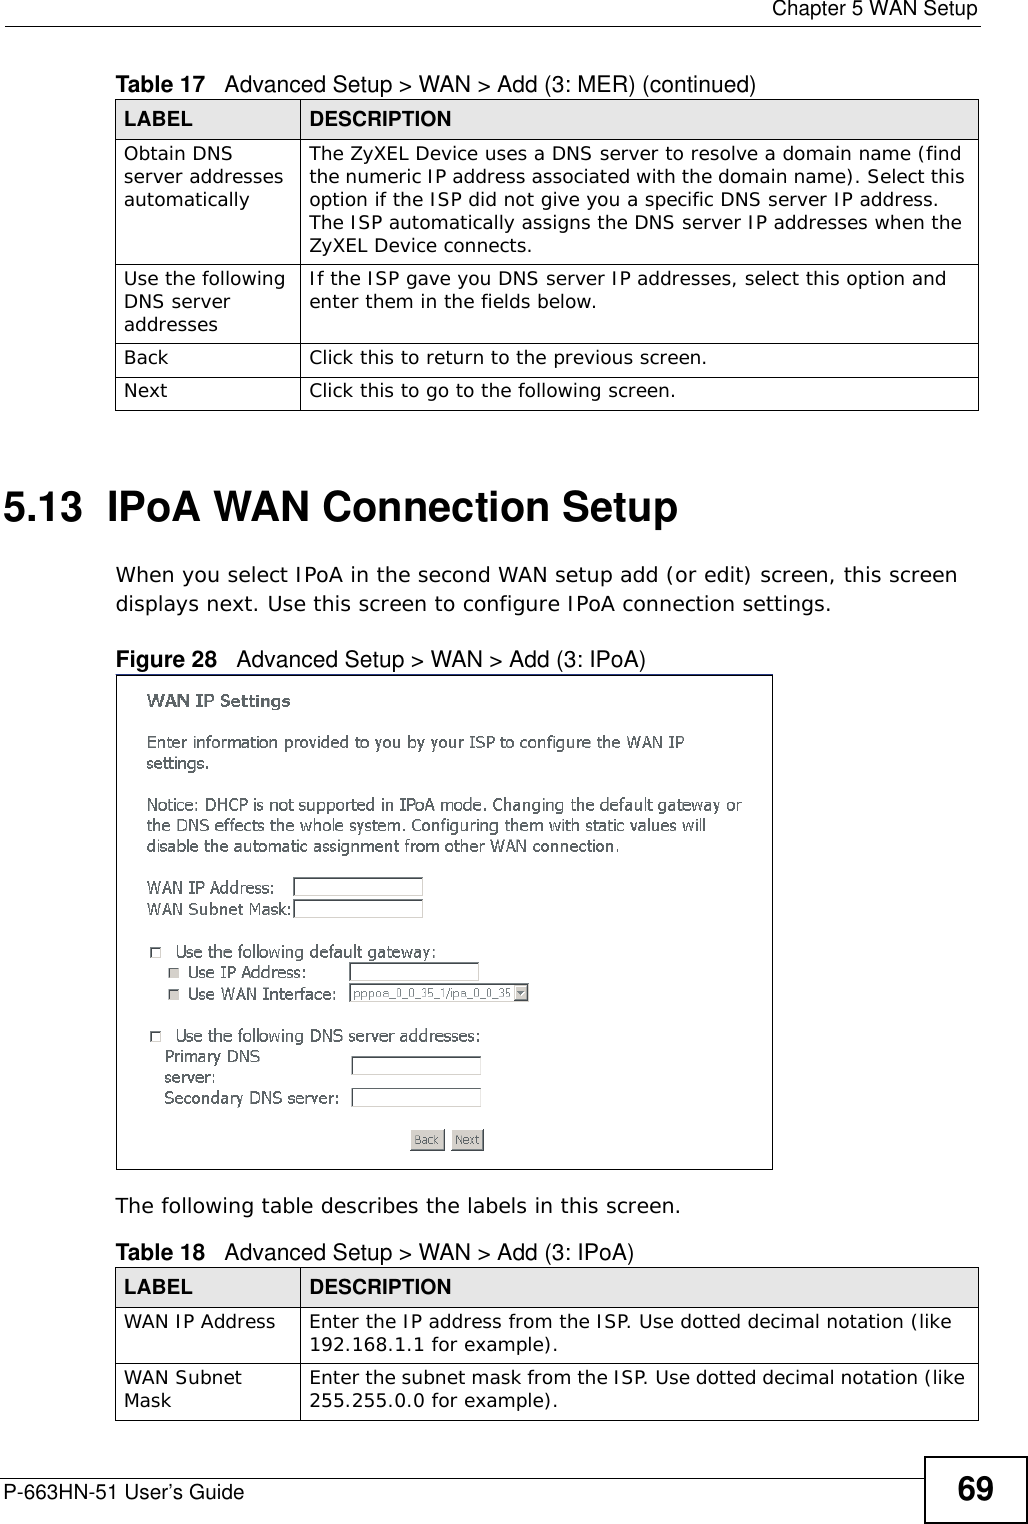  Chapter 5 WAN SetupP-663HN-51 User’s Guide 695.13  IPoA WAN Connection Setup When you select IPoA in the second WAN setup add (or edit) screen, this screen displays next. Use this screen to configure IPoA connection settings.Figure 28   Advanced Setup &gt; WAN &gt; Add (3: IPoA)The following table describes the labels in this screen.  Obtain DNS server addresses automaticallyThe ZyXEL Device uses a DNS server to resolve a domain name (find the numeric IP address associated with the domain name). Select this option if the ISP did not give you a specific DNS server IP address. The ISP automatically assigns the DNS server IP addresses when the ZyXEL Device connects.Use the following DNS server addresses If the ISP gave you DNS server IP addresses, select this option and enter them in the fields below.  Back Click this to return to the previous screen.Next Click this to go to the following screen.Table 17   Advanced Setup &gt; WAN &gt; Add (3: MER) (continued)LABEL DESCRIPTIONTable 18   Advanced Setup &gt; WAN &gt; Add (3: IPoA)LABEL DESCRIPTIONWAN IP Address Enter the IP address from the ISP. Use dotted decimal notation (like 192.168.1.1 for example). WAN Subnet Mask Enter the subnet mask from the ISP. Use dotted decimal notation (like 255.255.0.0 for example). 